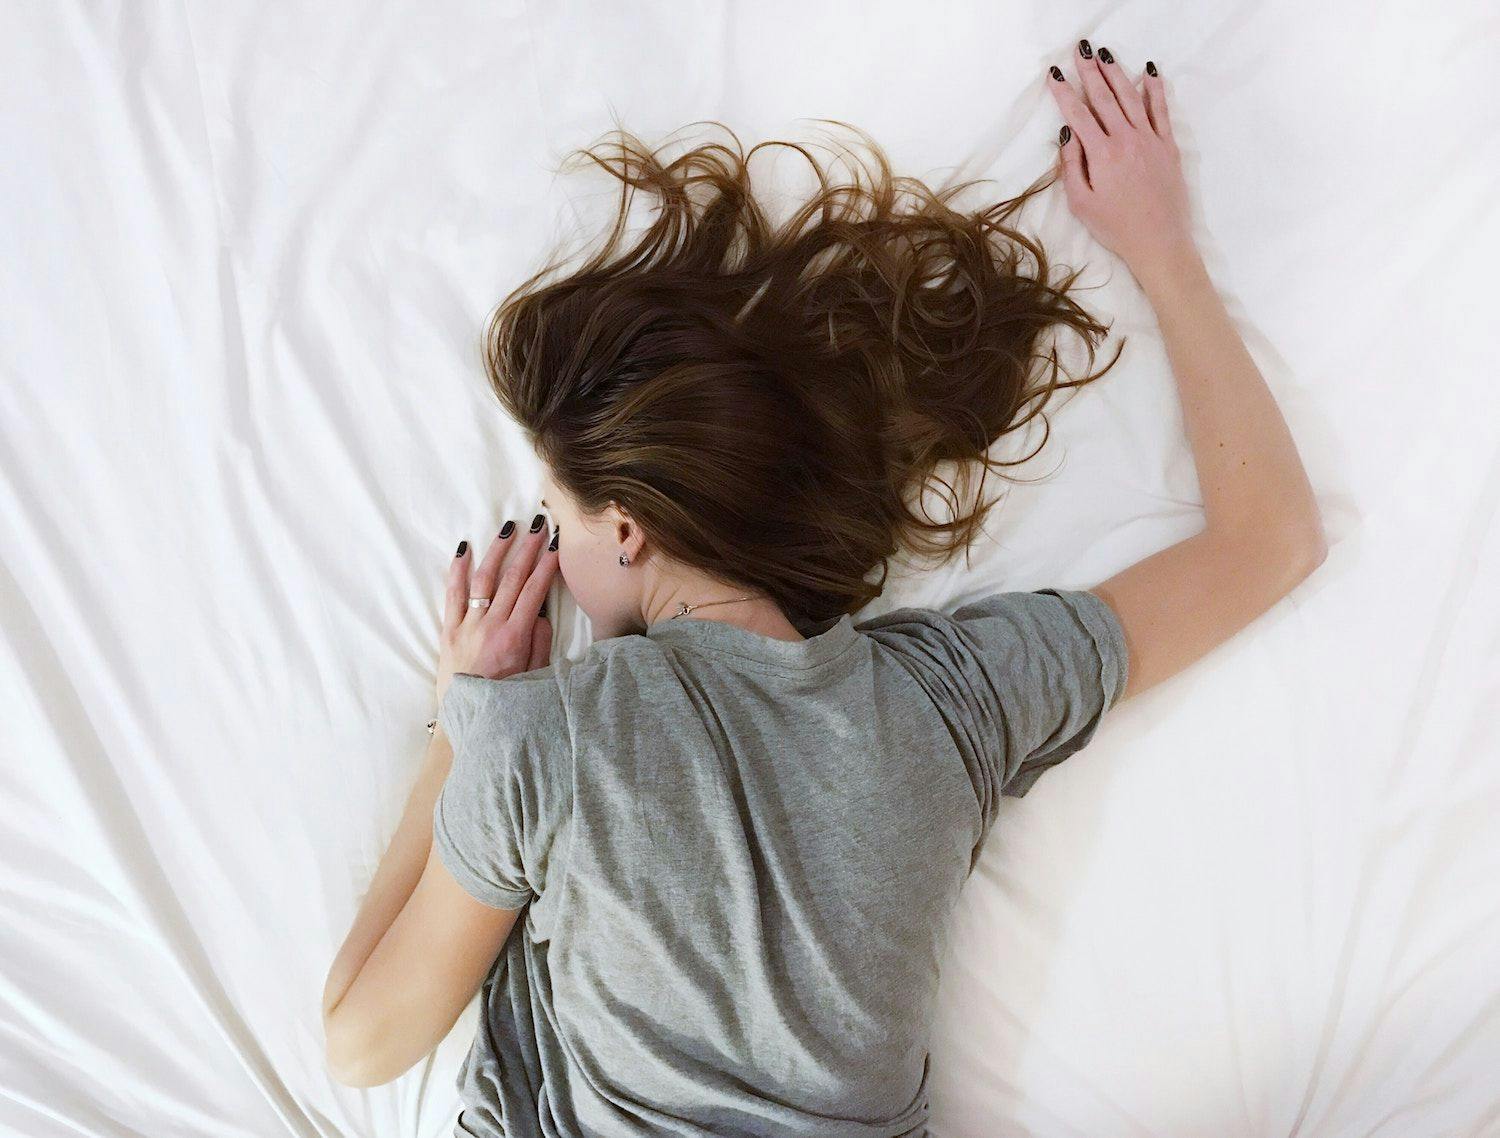 Body Clock Linked With Mental Health Problems, Says Research